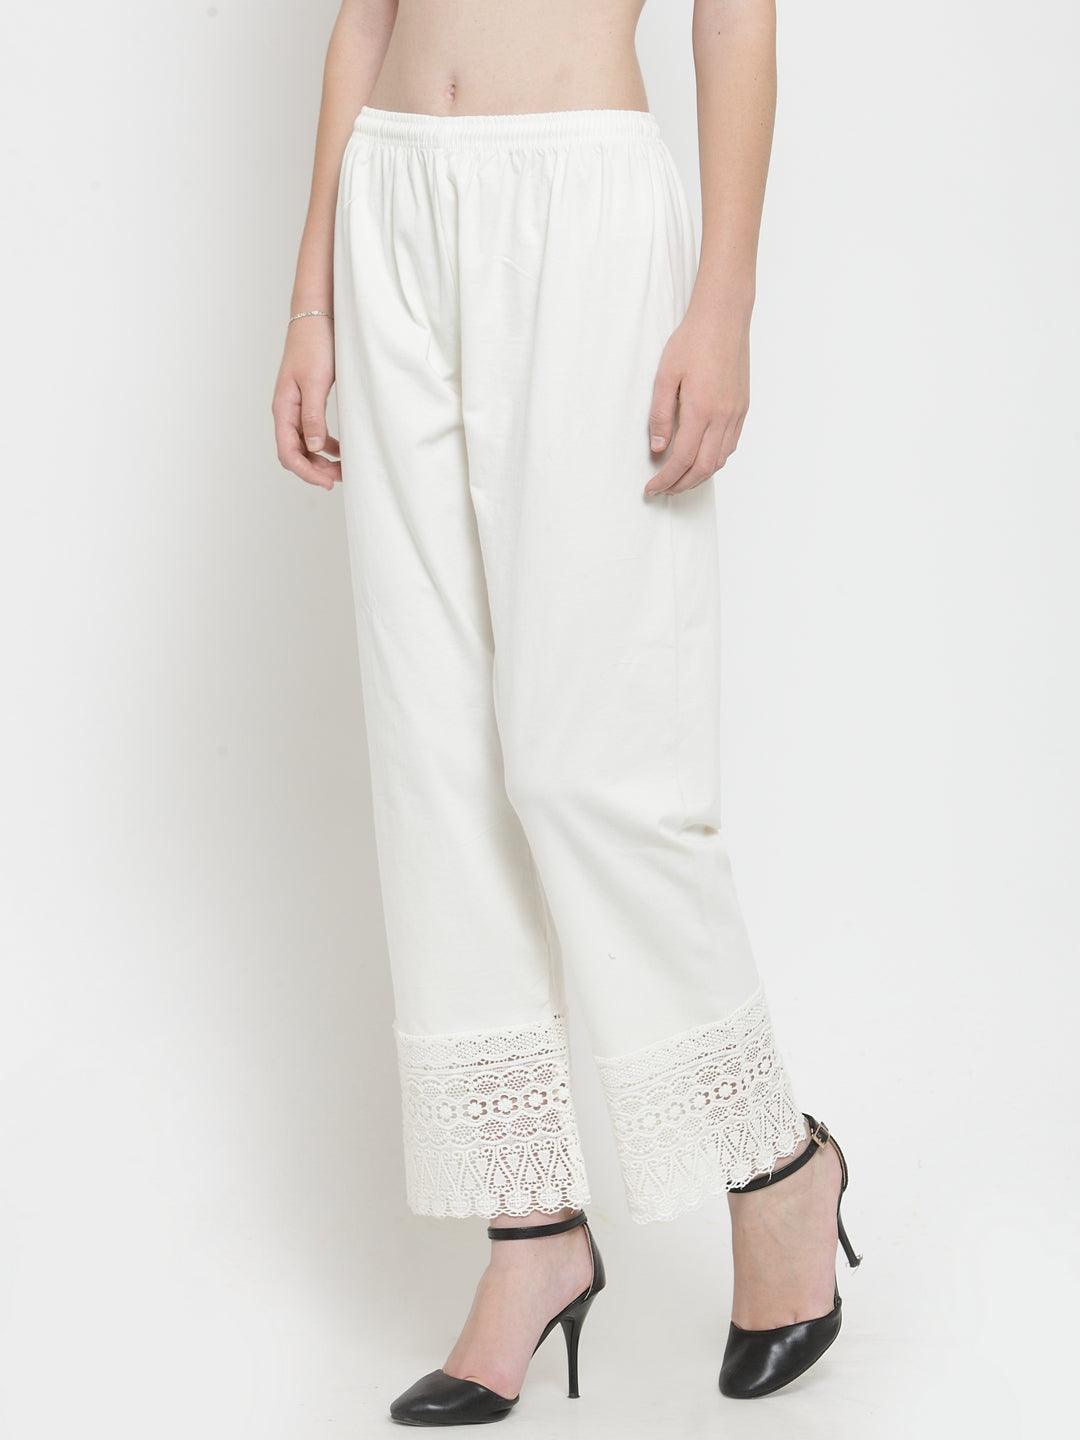 White Palazzo Pants With Crochet Lace Inserts Design by Sage Saga at  Pernias Pop Up Shop 2023